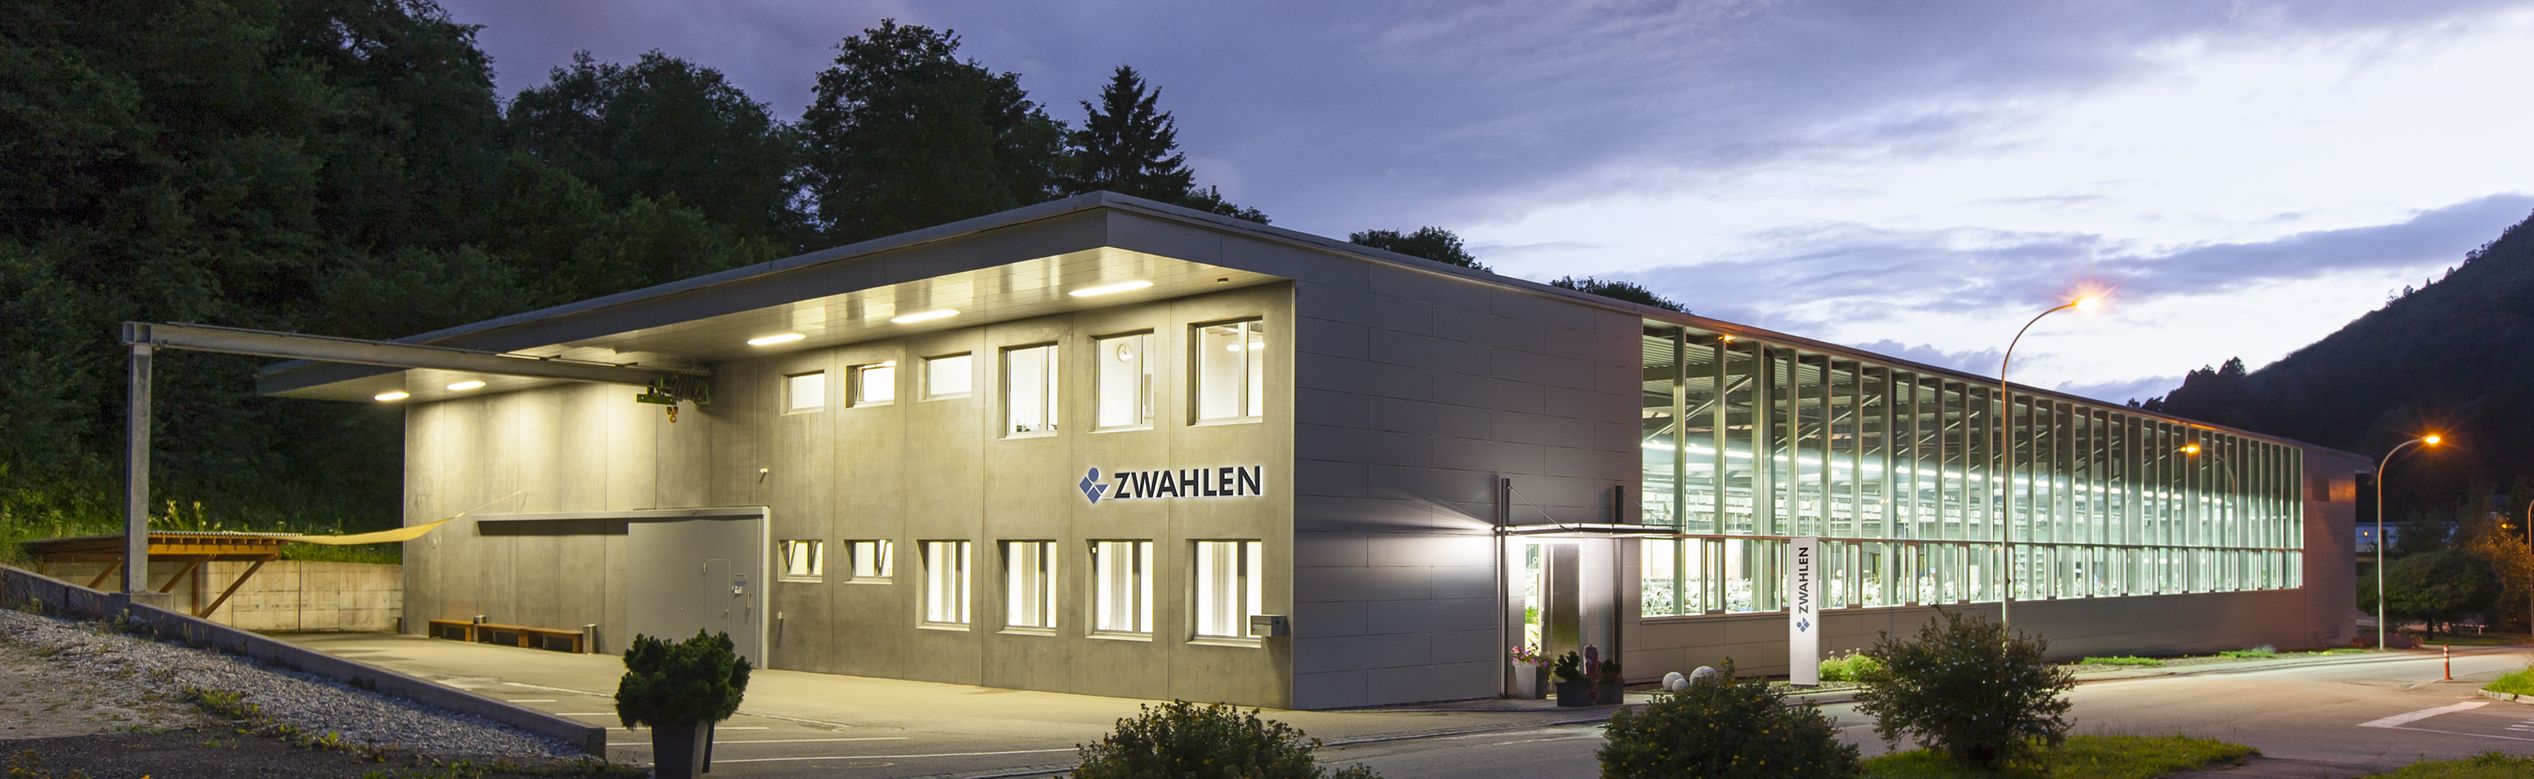 Ronda's newest subsidiary, Zwahlen SA in Court, produces turned parts for the watch industry.